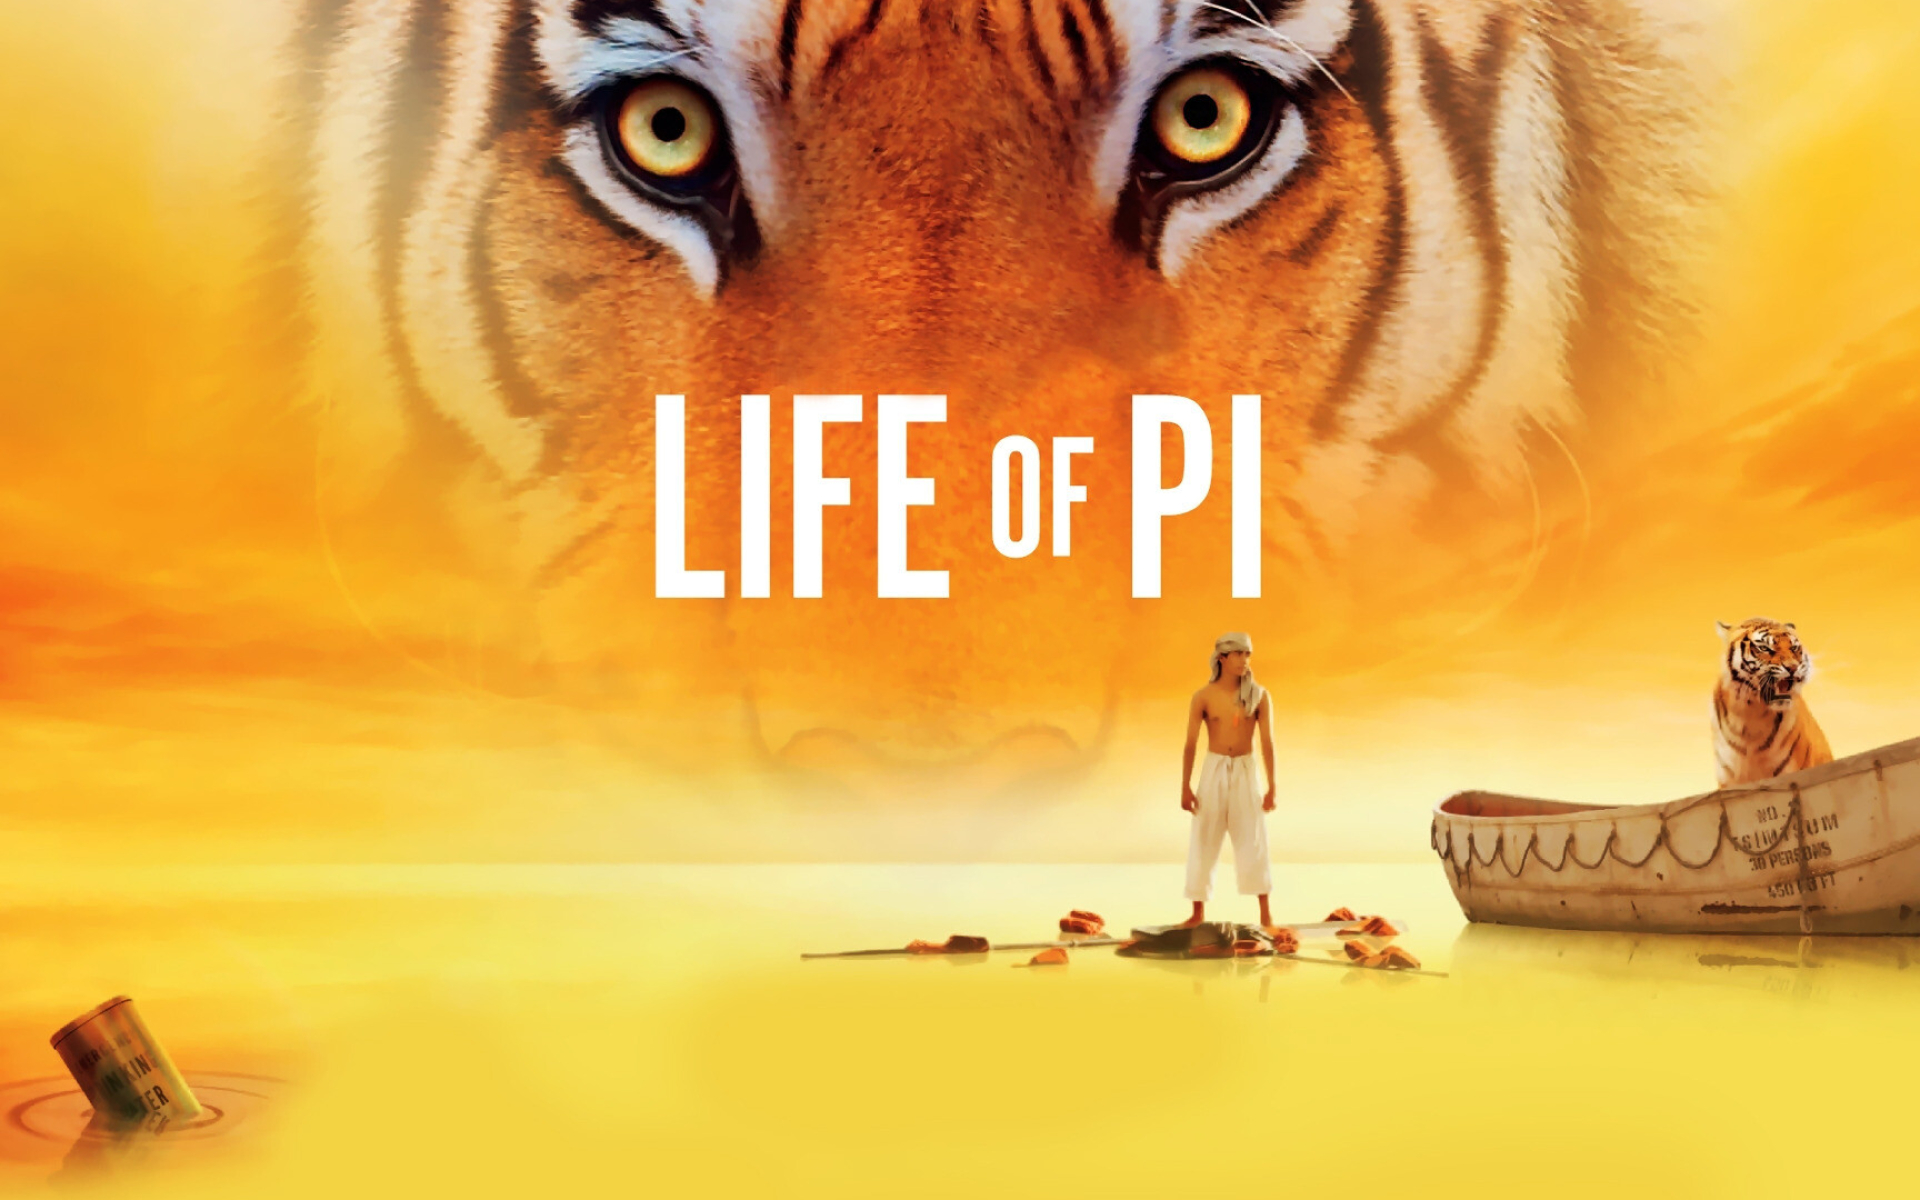 Life of Pi: Lee has created a superbly balanced motion picture that moves special effects and 3D beyond the realm of pure entertainment augmentation, 2012, Movie. 1920x1200 HD Background.